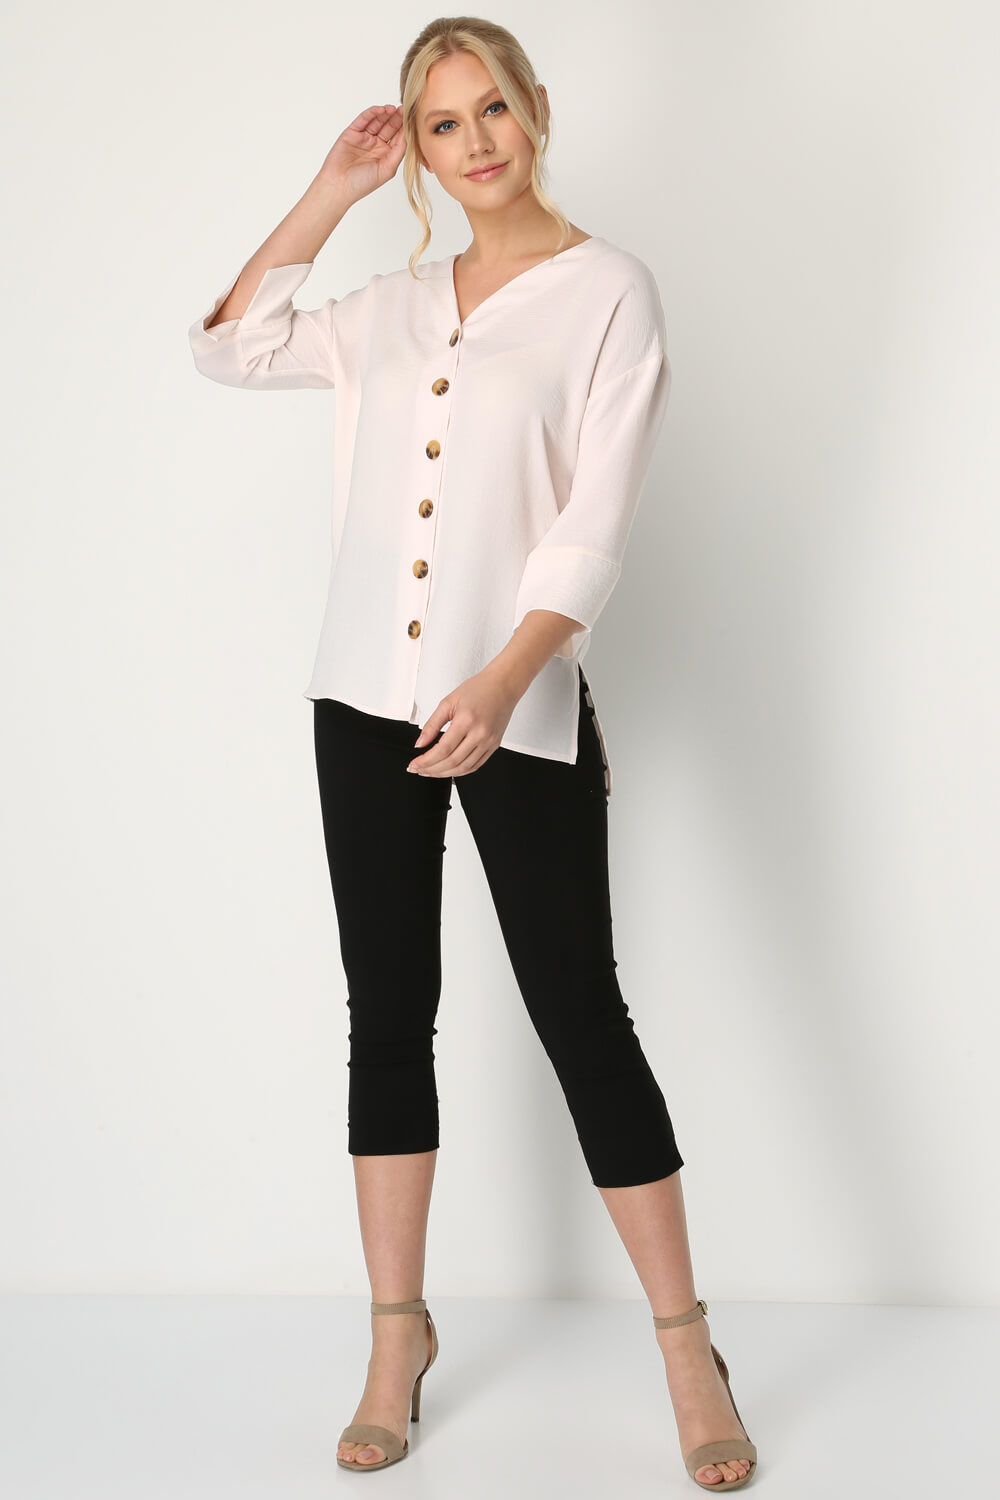 PINK Button Detail Blouse, Image 2 of 8